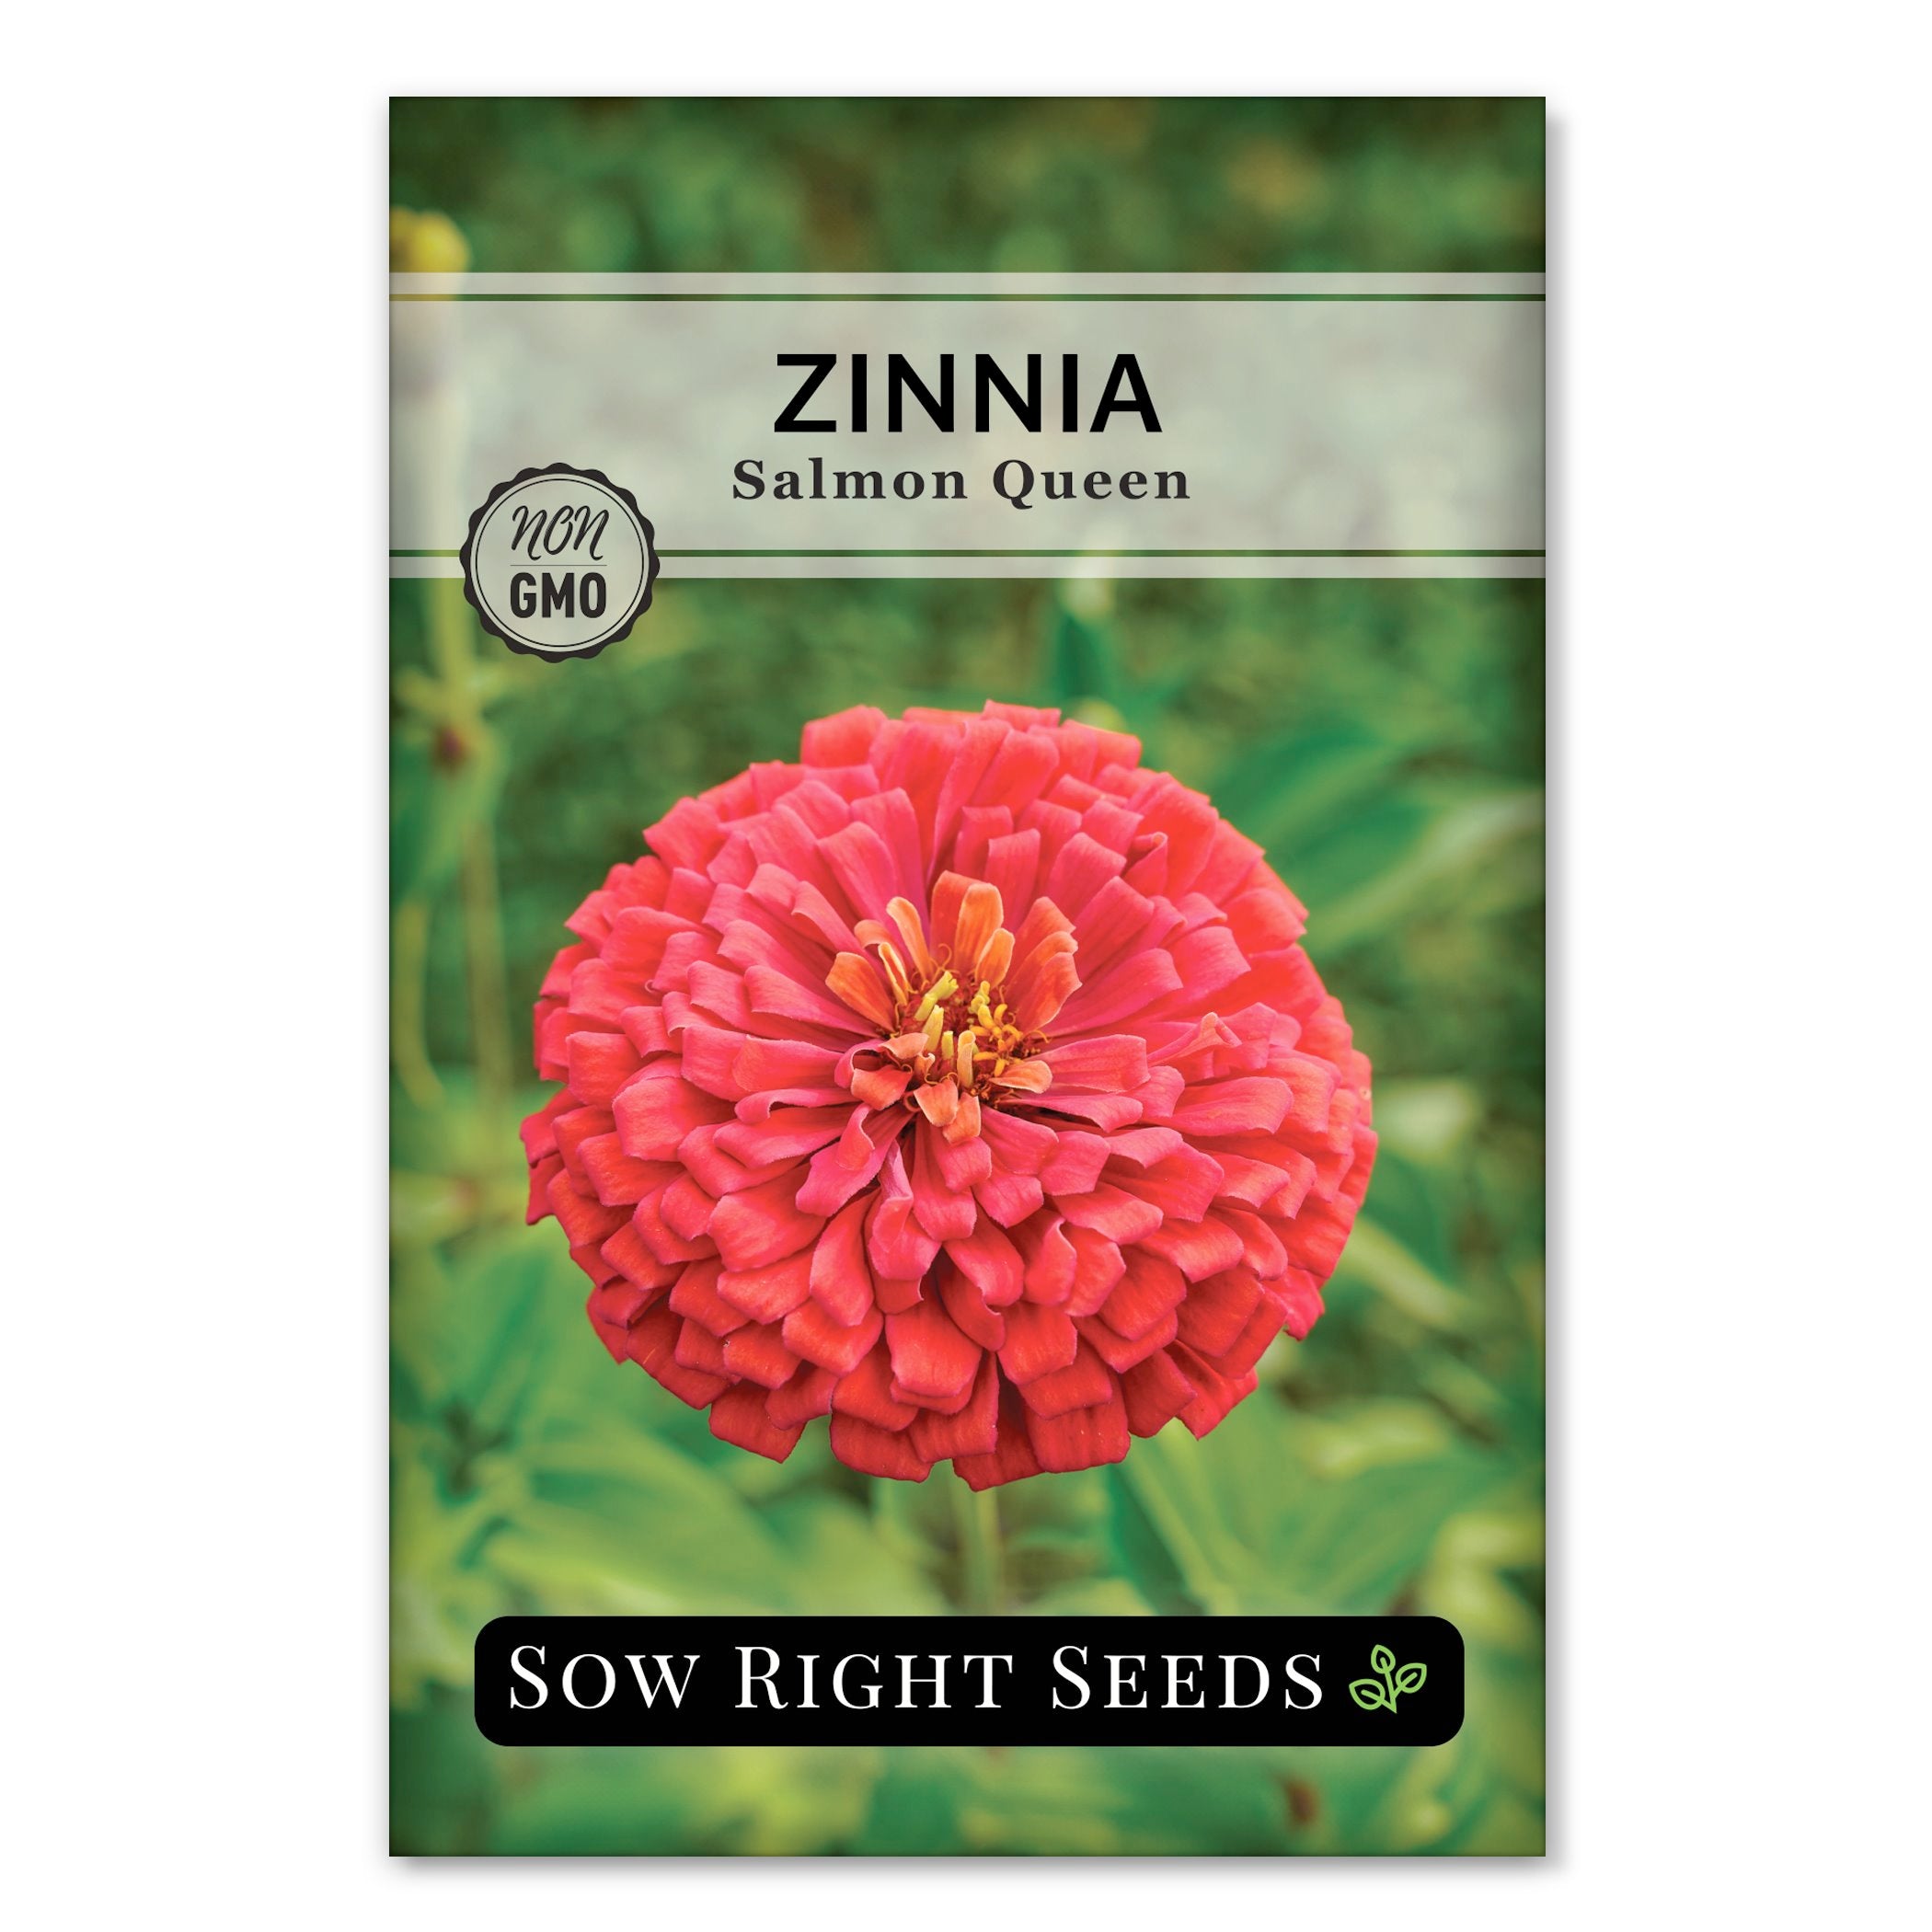 Salmon Queen Zinnia – Sow Right Seeds